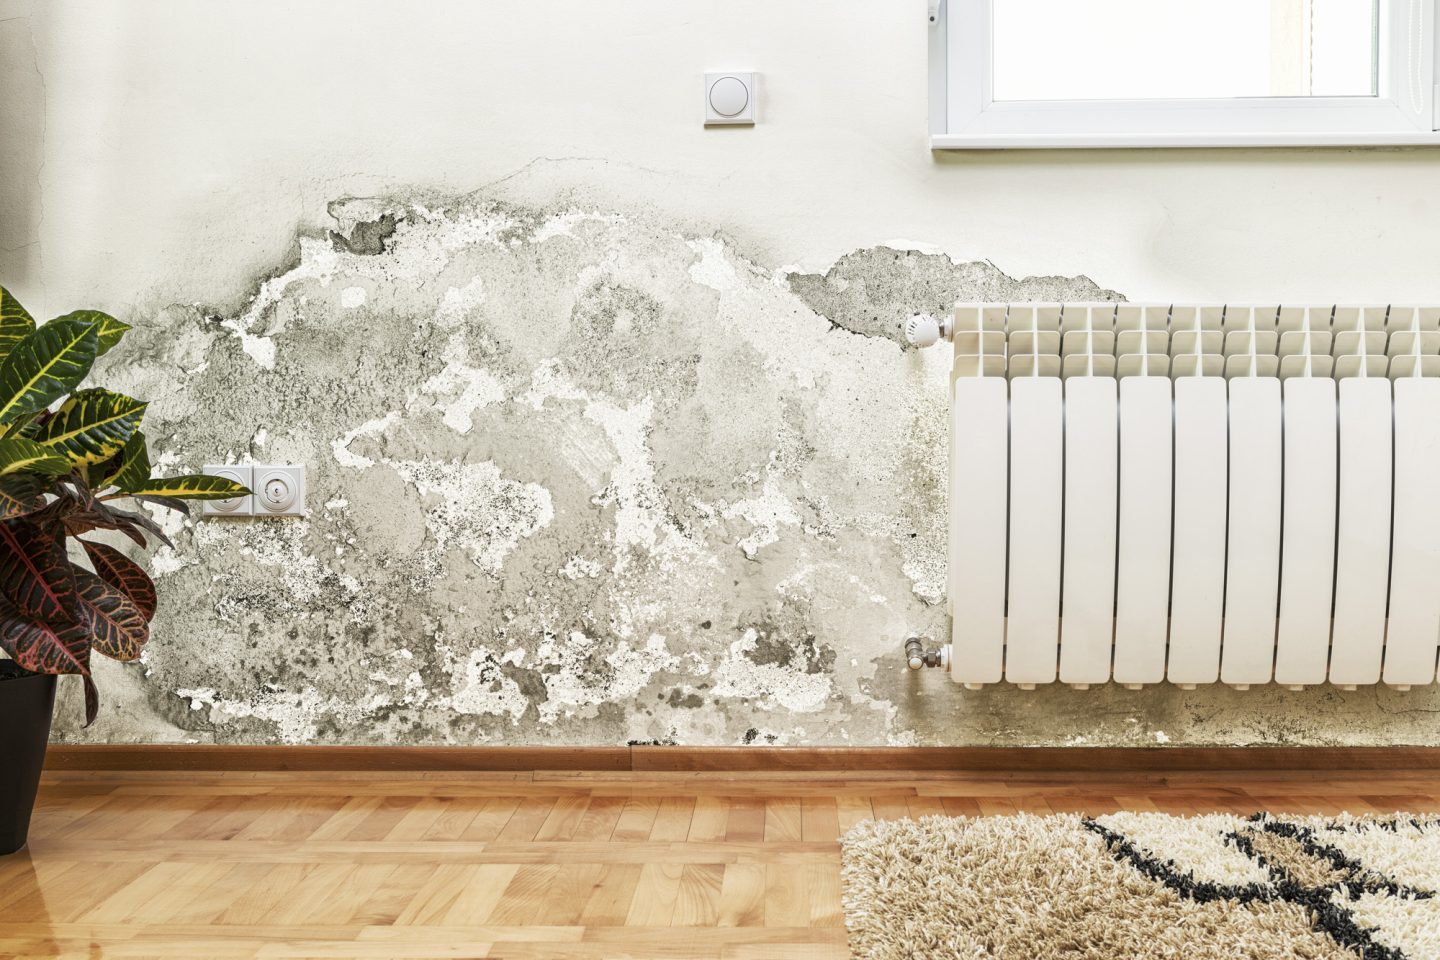 How to Handle Water Mold After a Burst Pipe